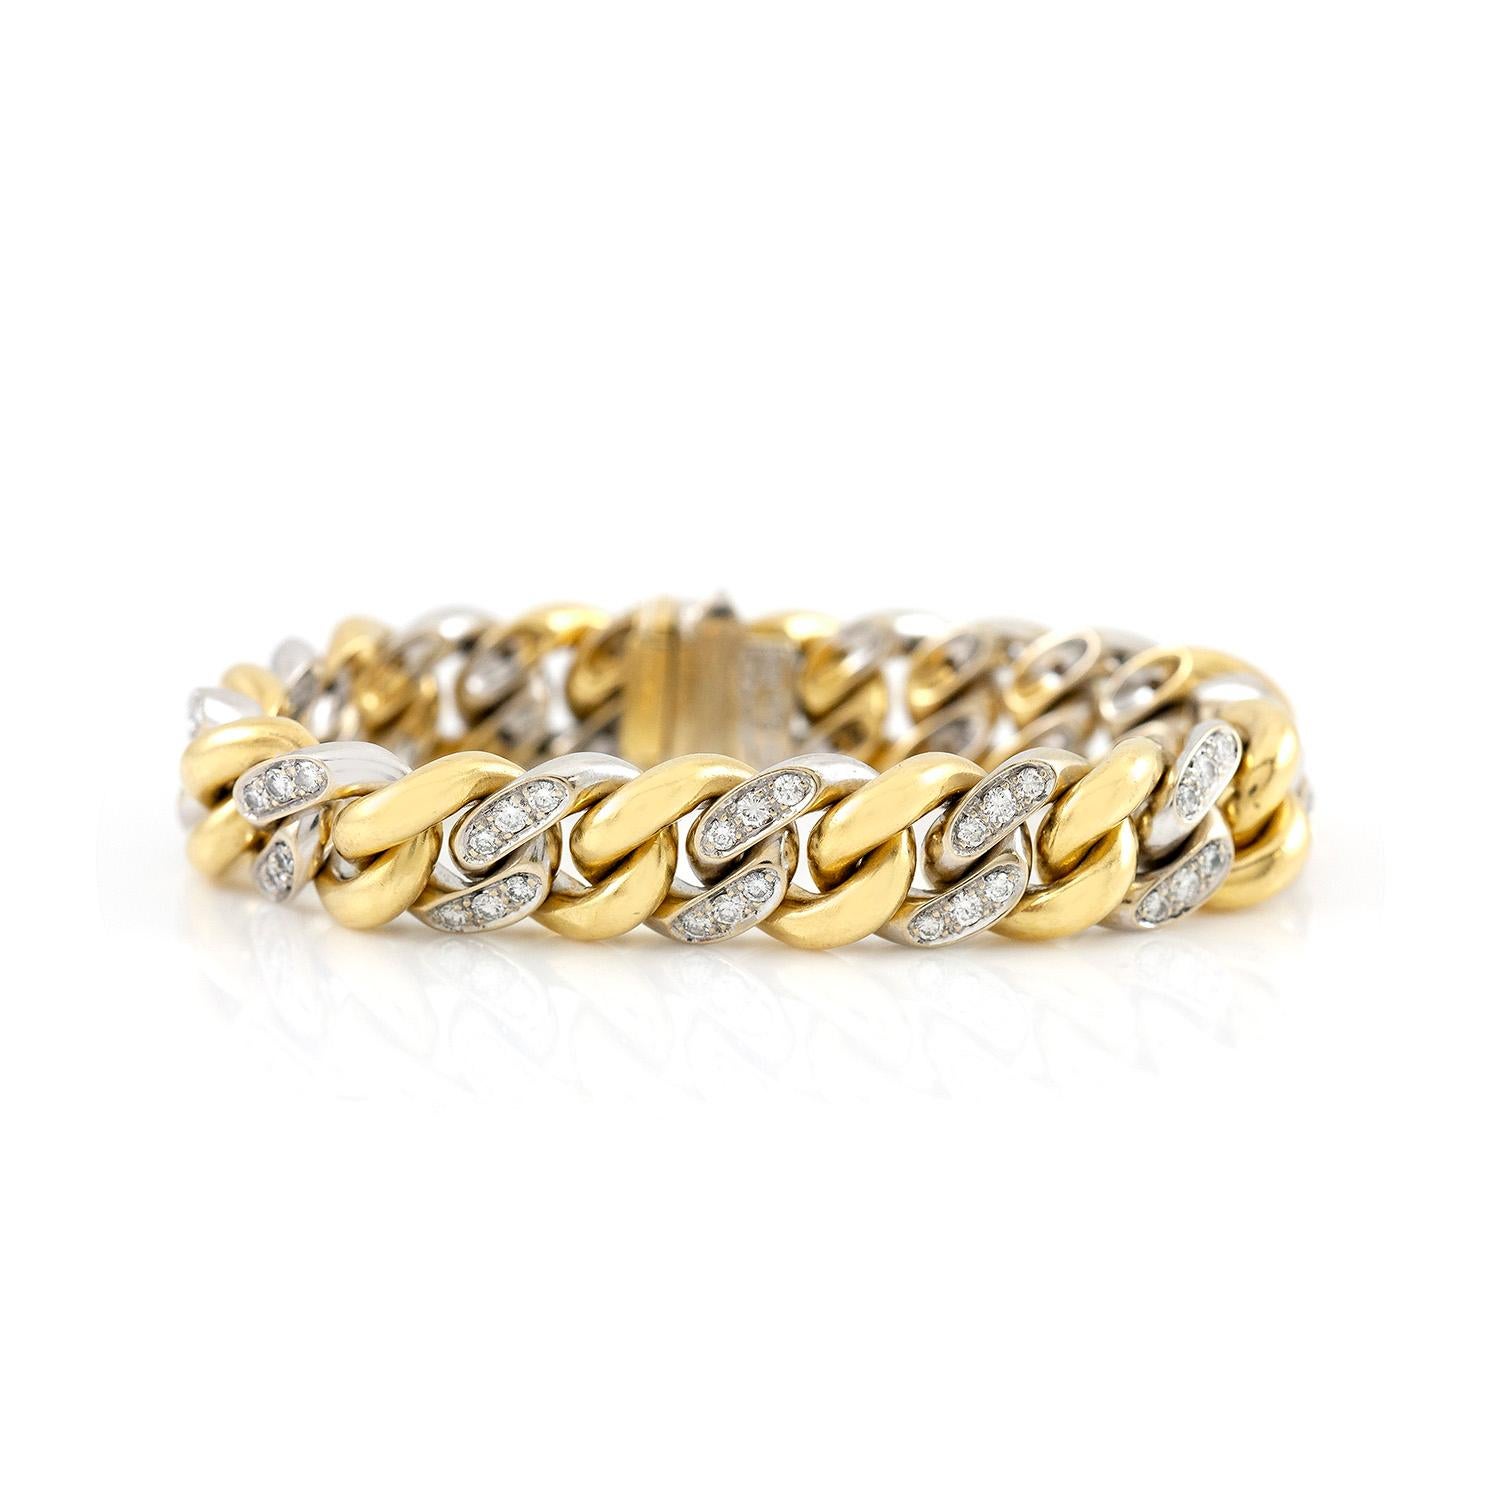 The bracelet is finely crafted in 18k yellow gold with diamonds weighing approximately total of 4.00 and the bracelet is weighing approximately total of 69.4 DWT.
Signed by Pomellato.